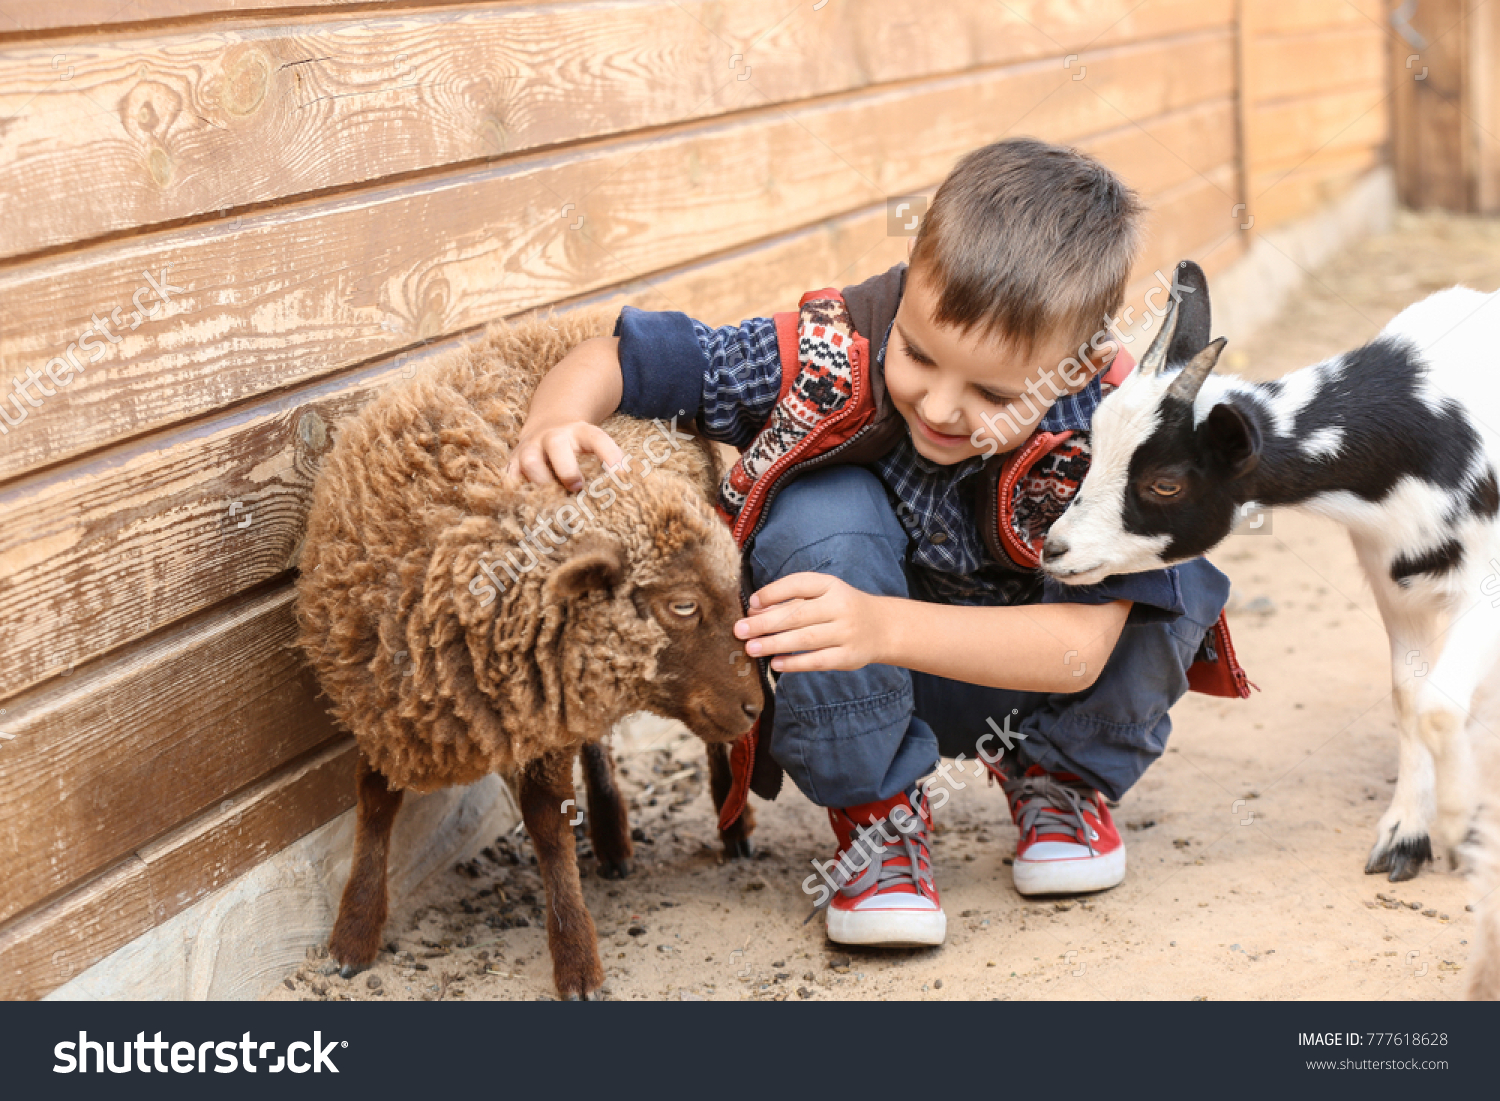 Cute little boy with sheep in petting zoo #777618628